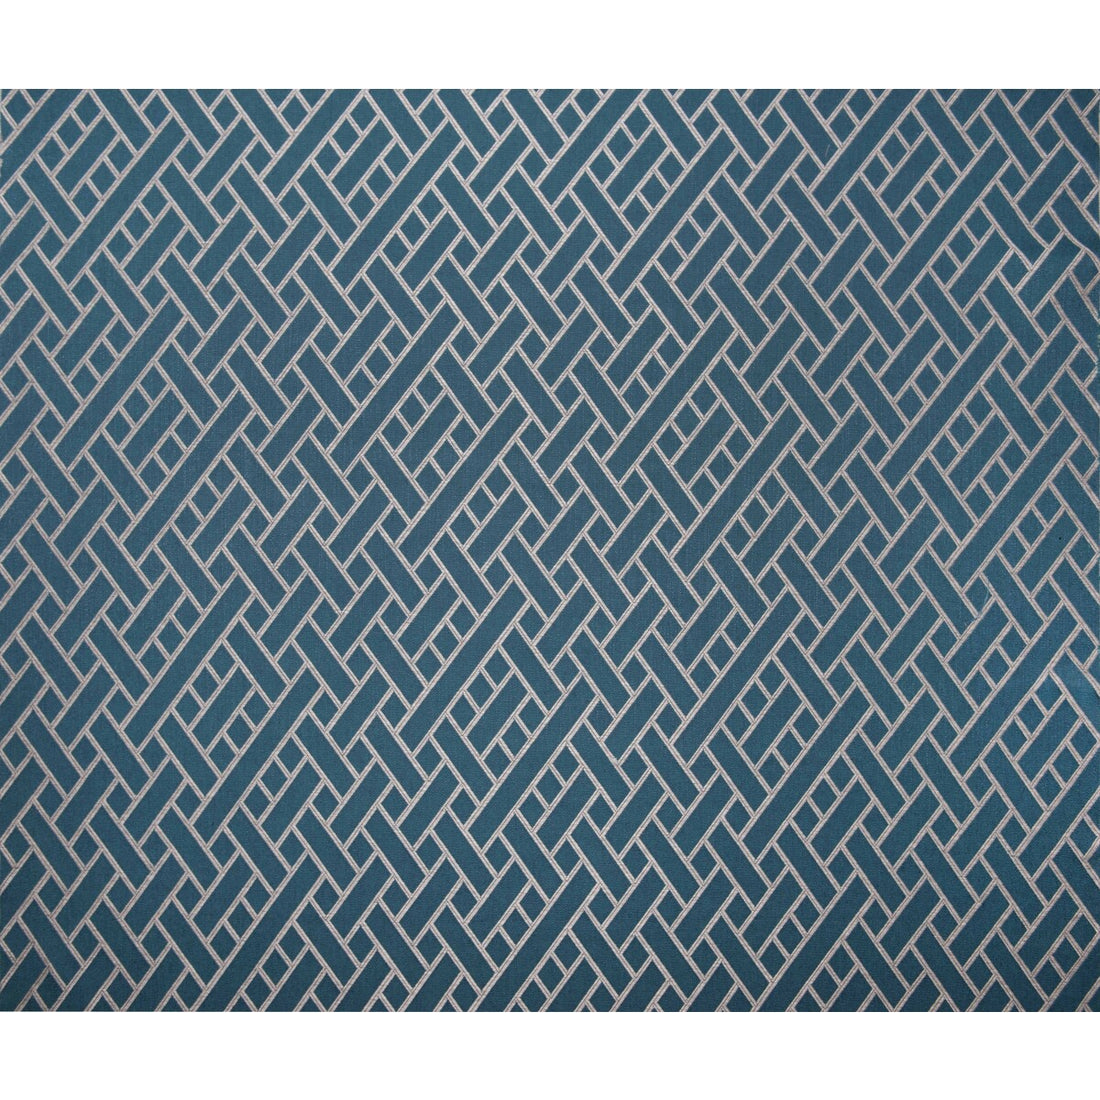 Nairobi fabric in oceano color - pattern GDT5374.8.0 - by Gaston y Daniela in the Gaston Africalia collection